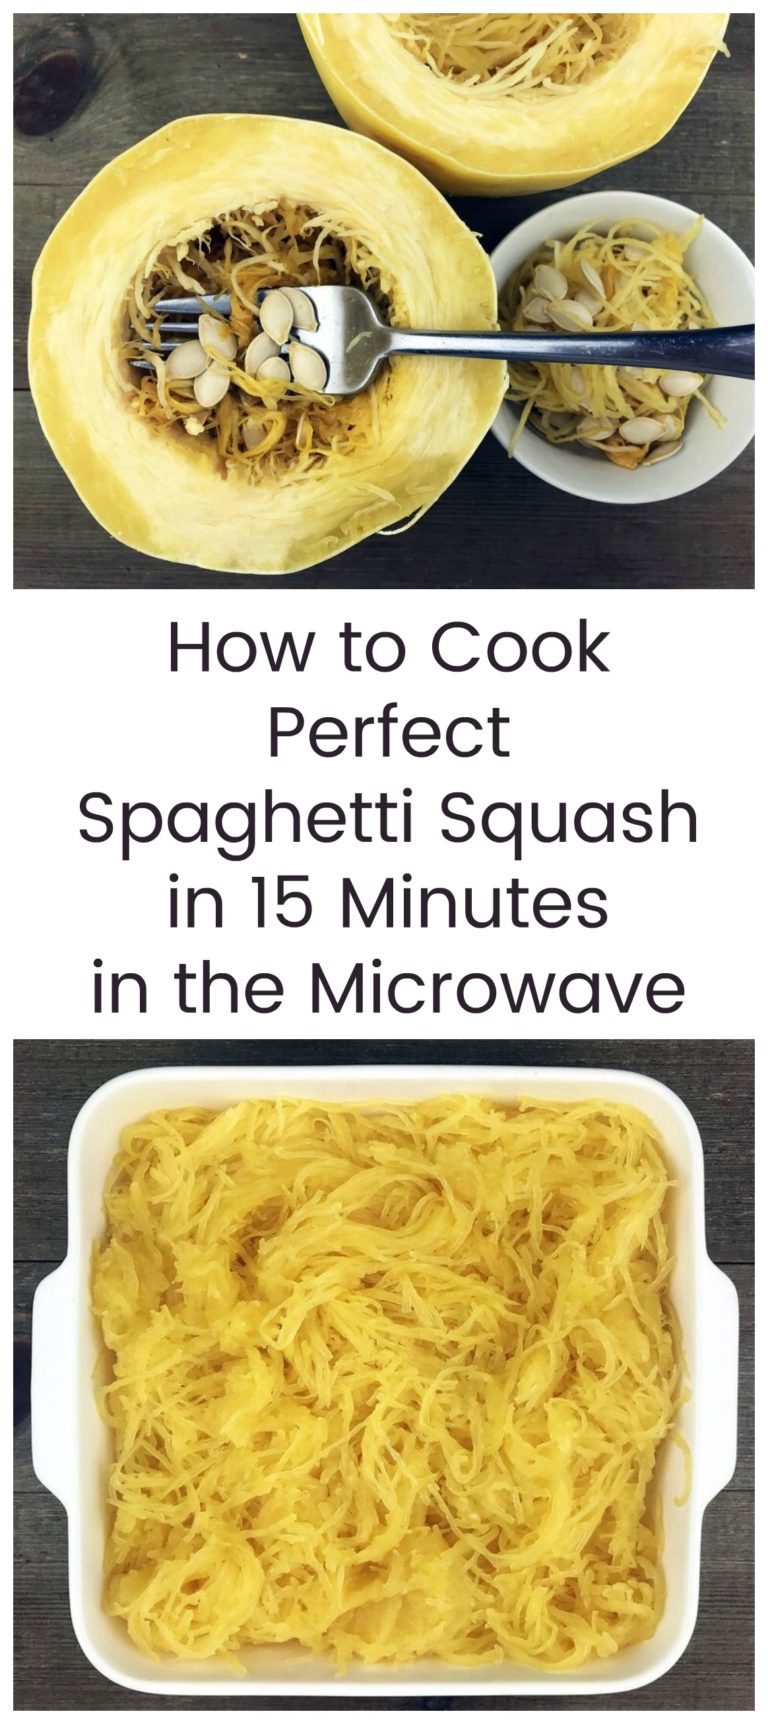 How to Cook Perfect Spaghetti Squash in 15 Minutes in the Microwave ...